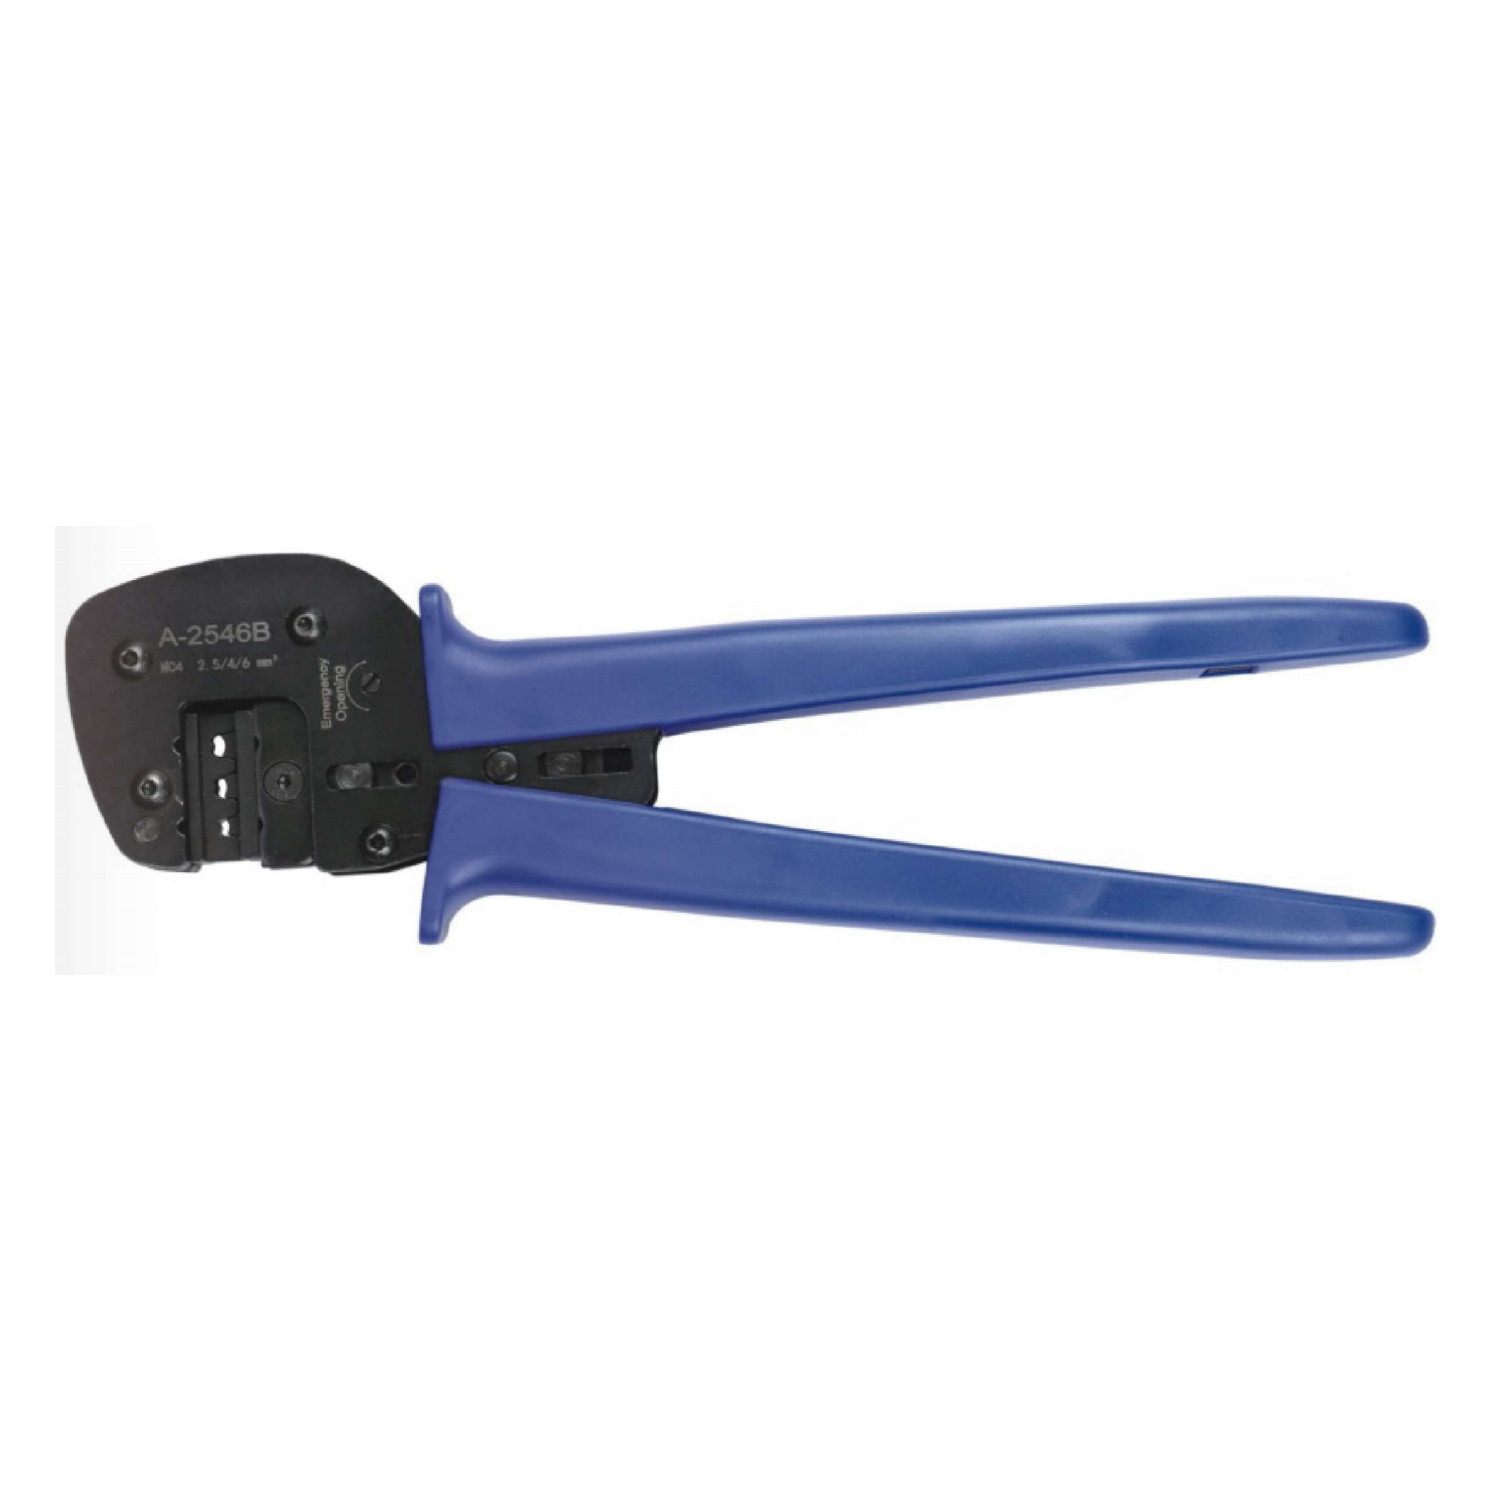 Get Precise and Secure Wire Connections with our Top-Quality Crimping Pliers for Solar Panels and Photovoltaic Connectors